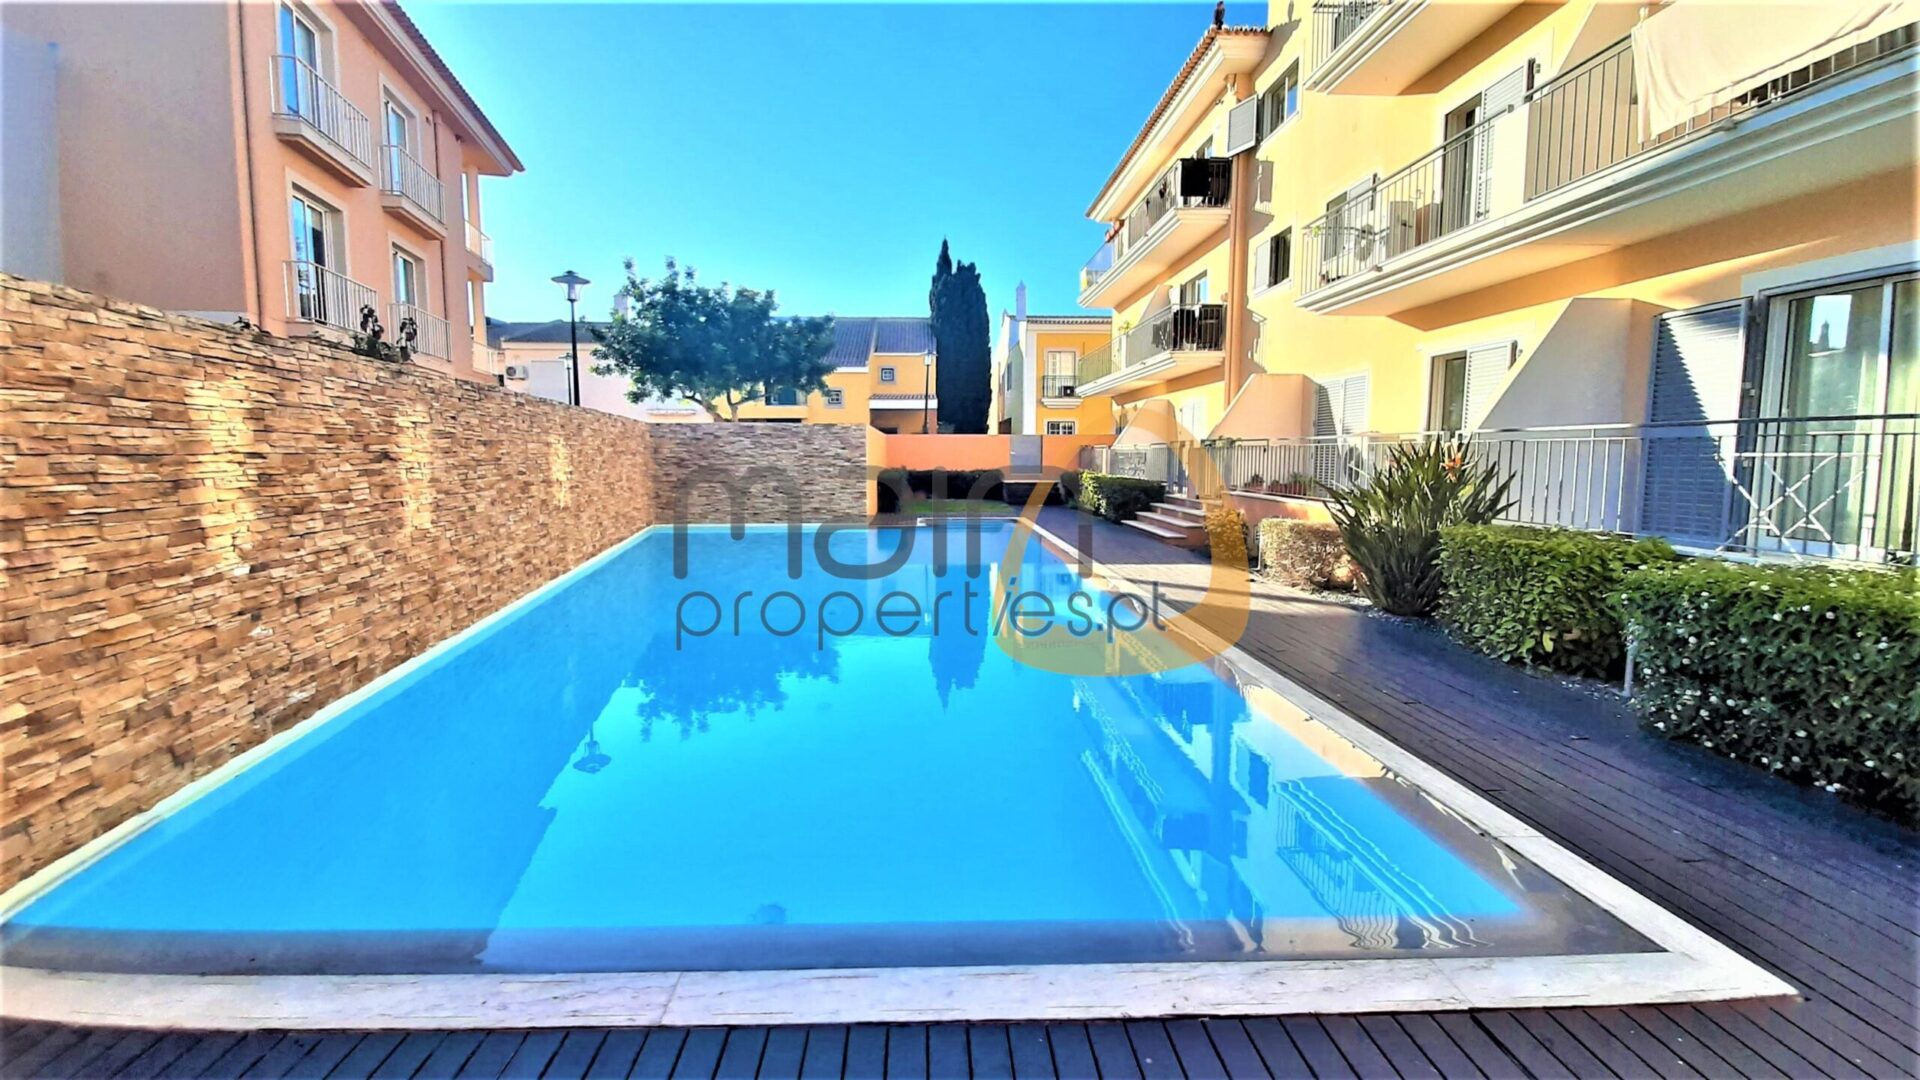 2 bedroom apartment in gated community with swimming pool in Vilamoura